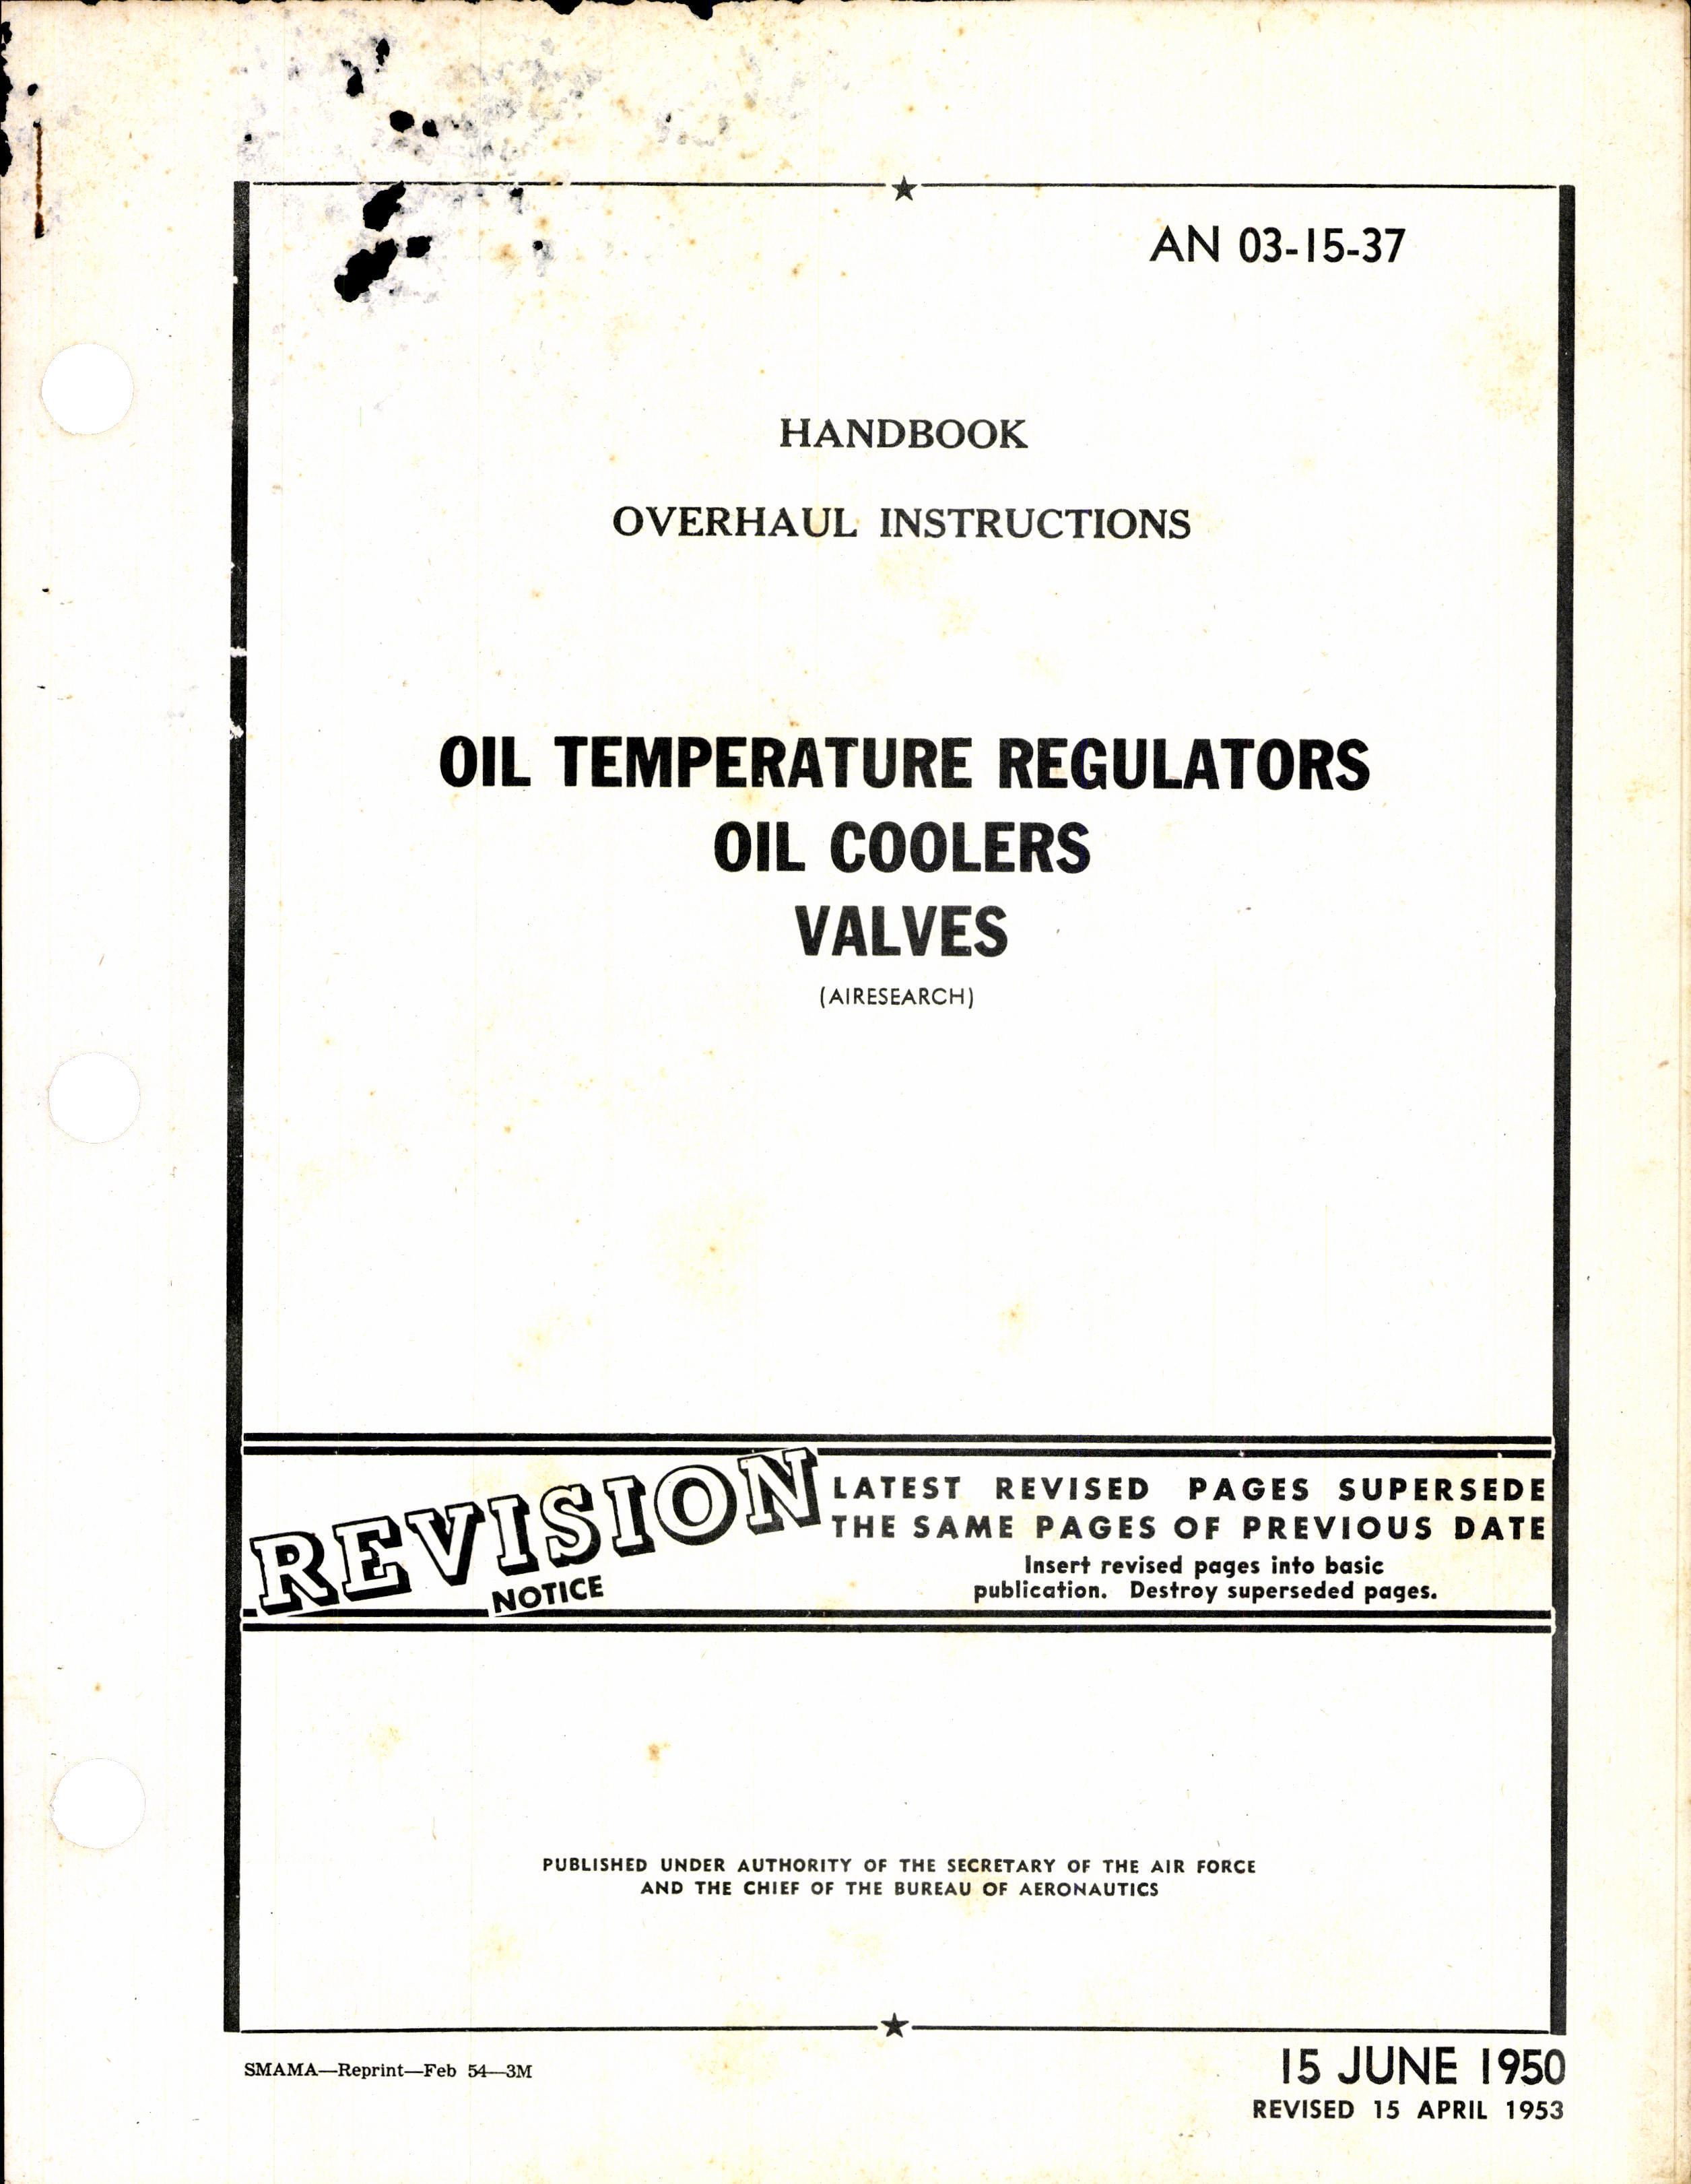 Sample page 1 from AirCorps Library document: Overhaul Instructions for Airesearch Oil Temperature Regulators, Oil Coolers, and Valves